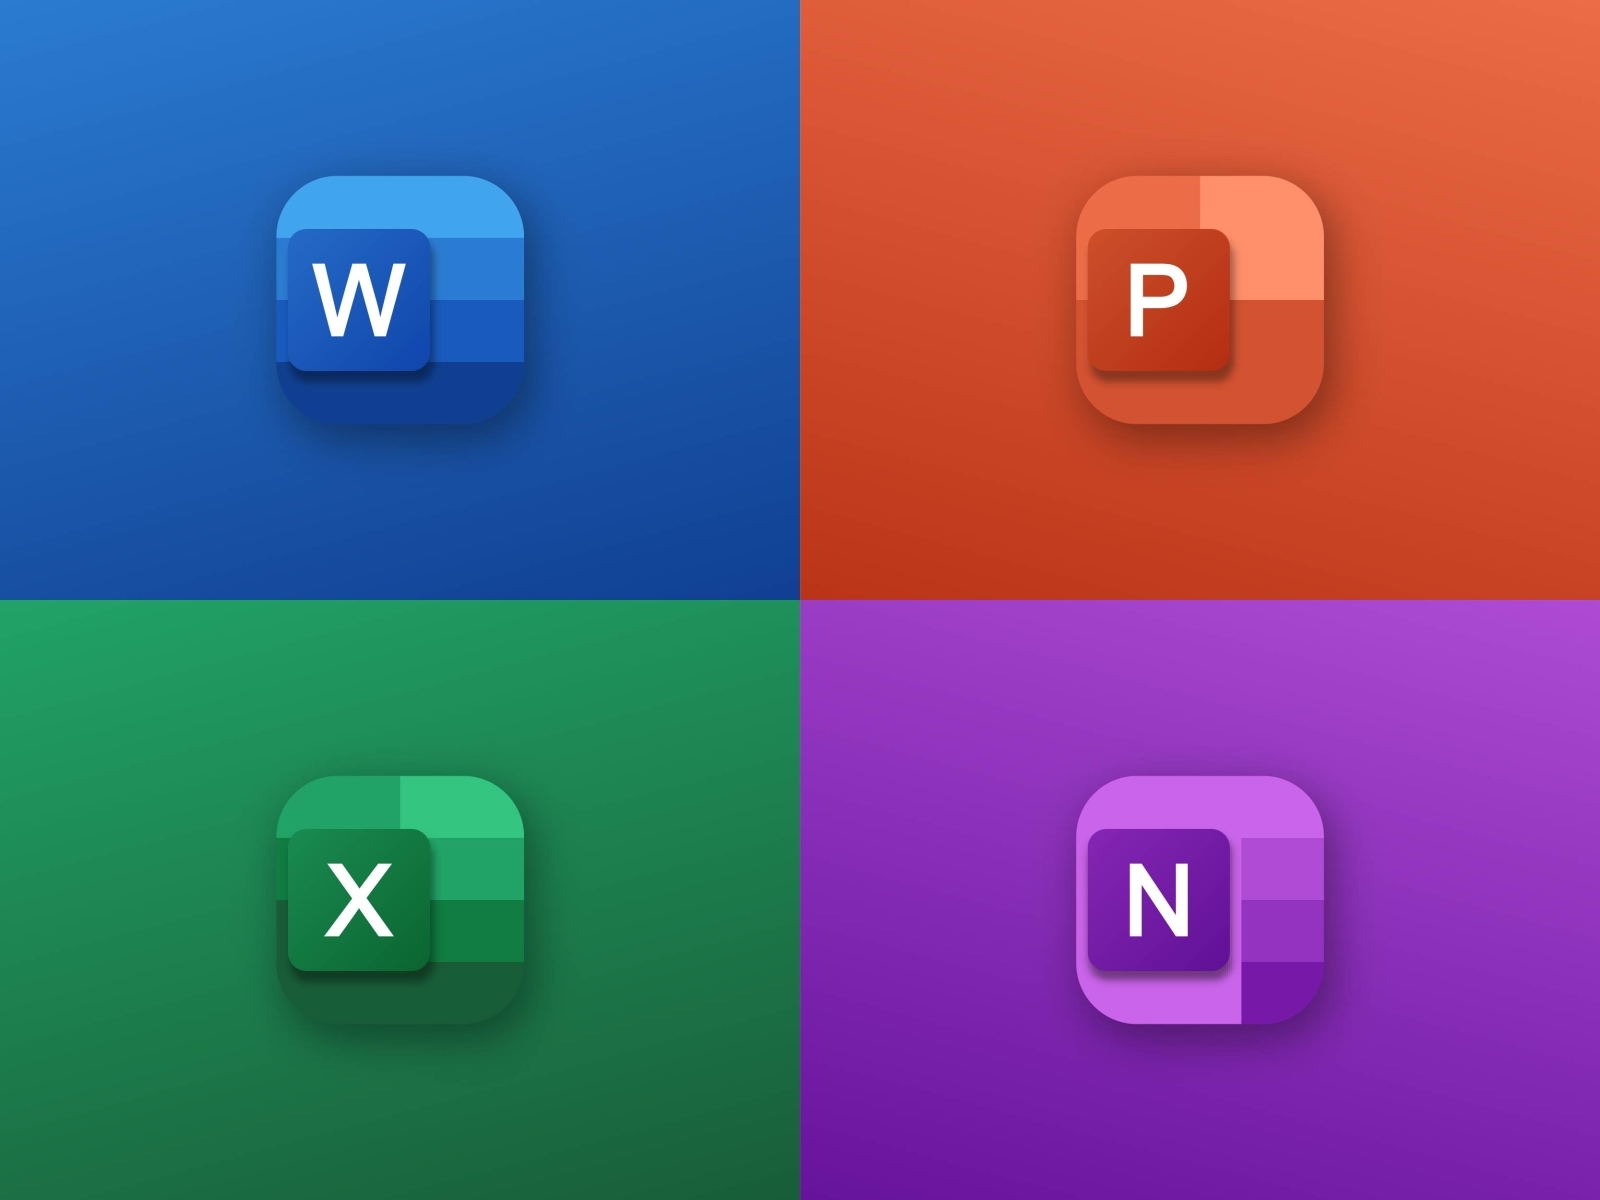 Microsoft Office 365 - Icons Redesign by Mian Salman on Dribbble